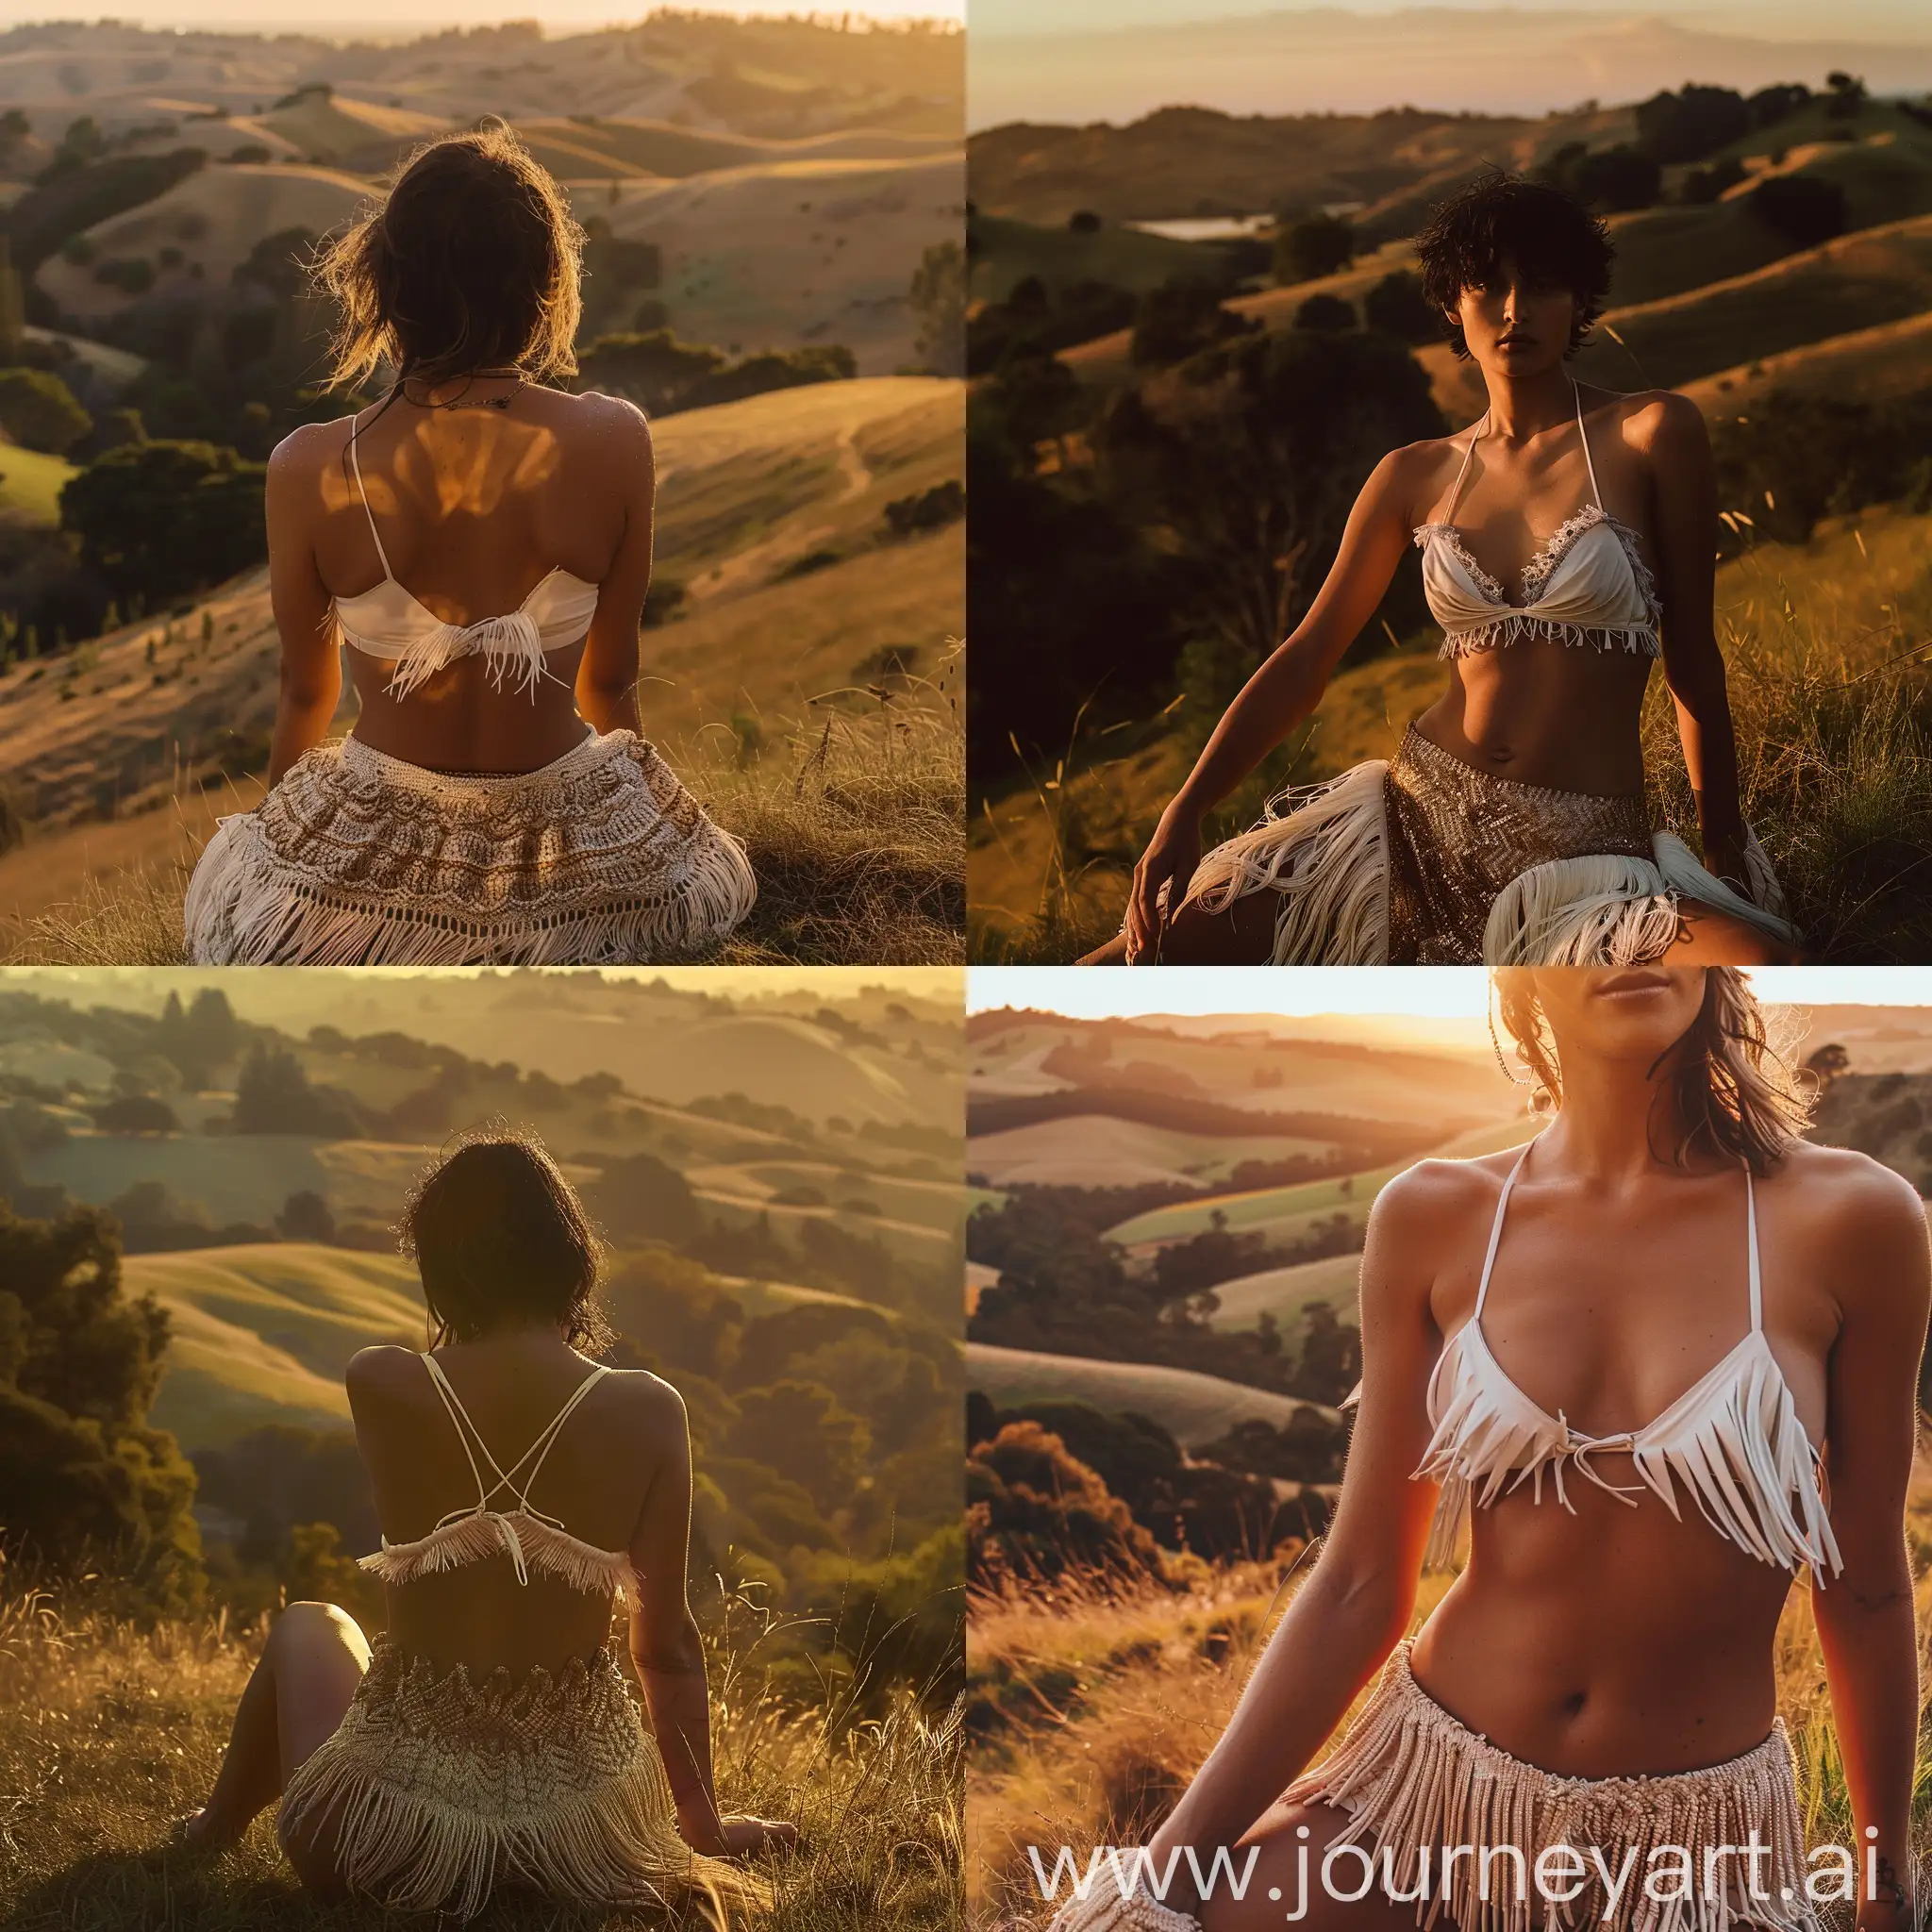  a person in a bohemian outfit against a scenic backdrop during the golden hour. The person is wearing a white bikini top with fringes and a textured skirt with fringes, sitting on a grassy hillside. The landscape includes rolling hills, trees, and warm colors, creating a serene and peaceful atmosphere. 